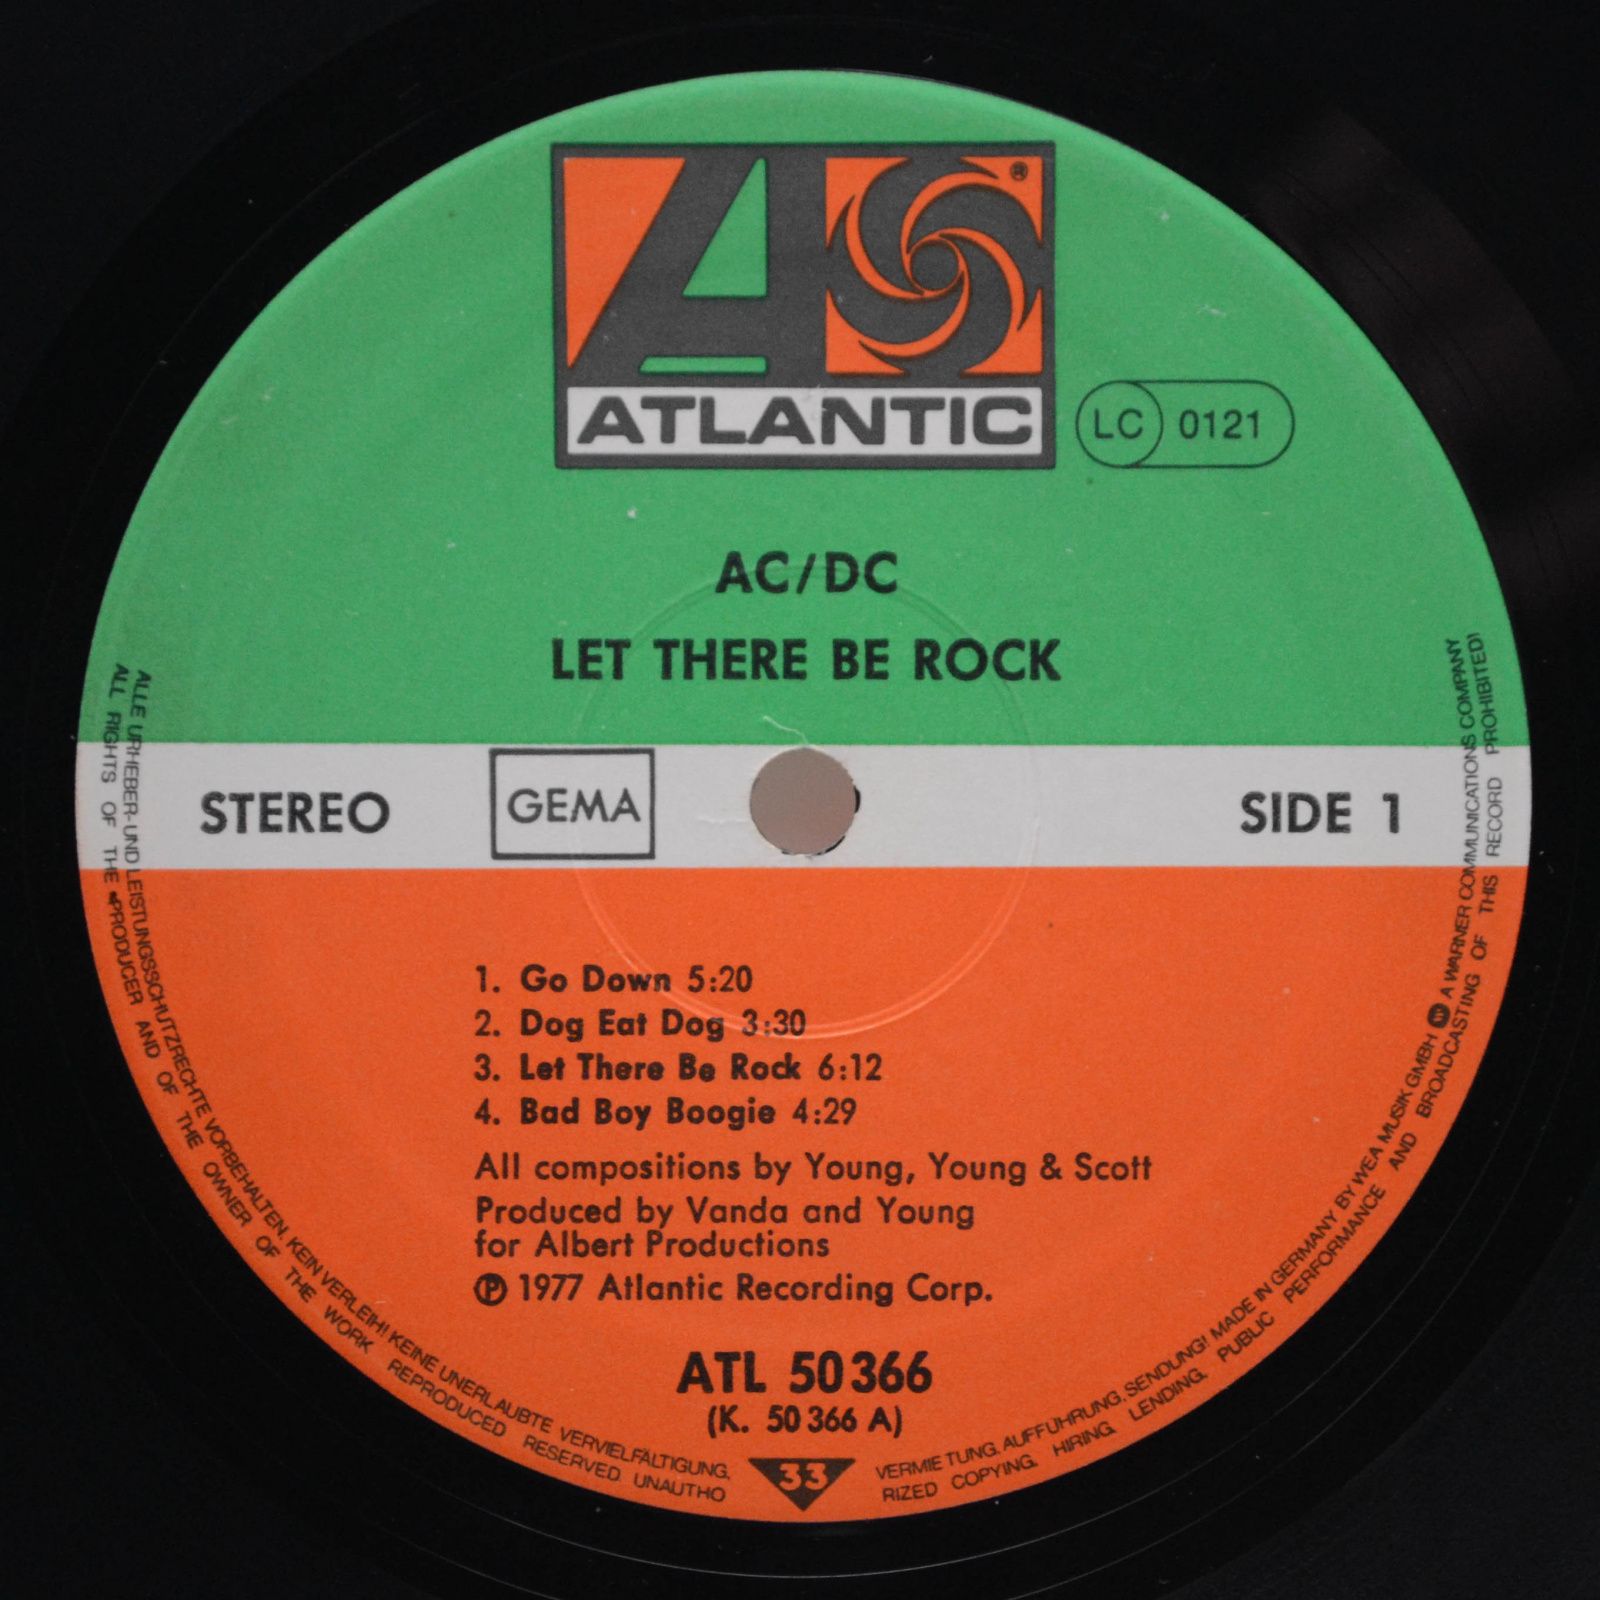 AC/DC — Let There Be Rock, 1977